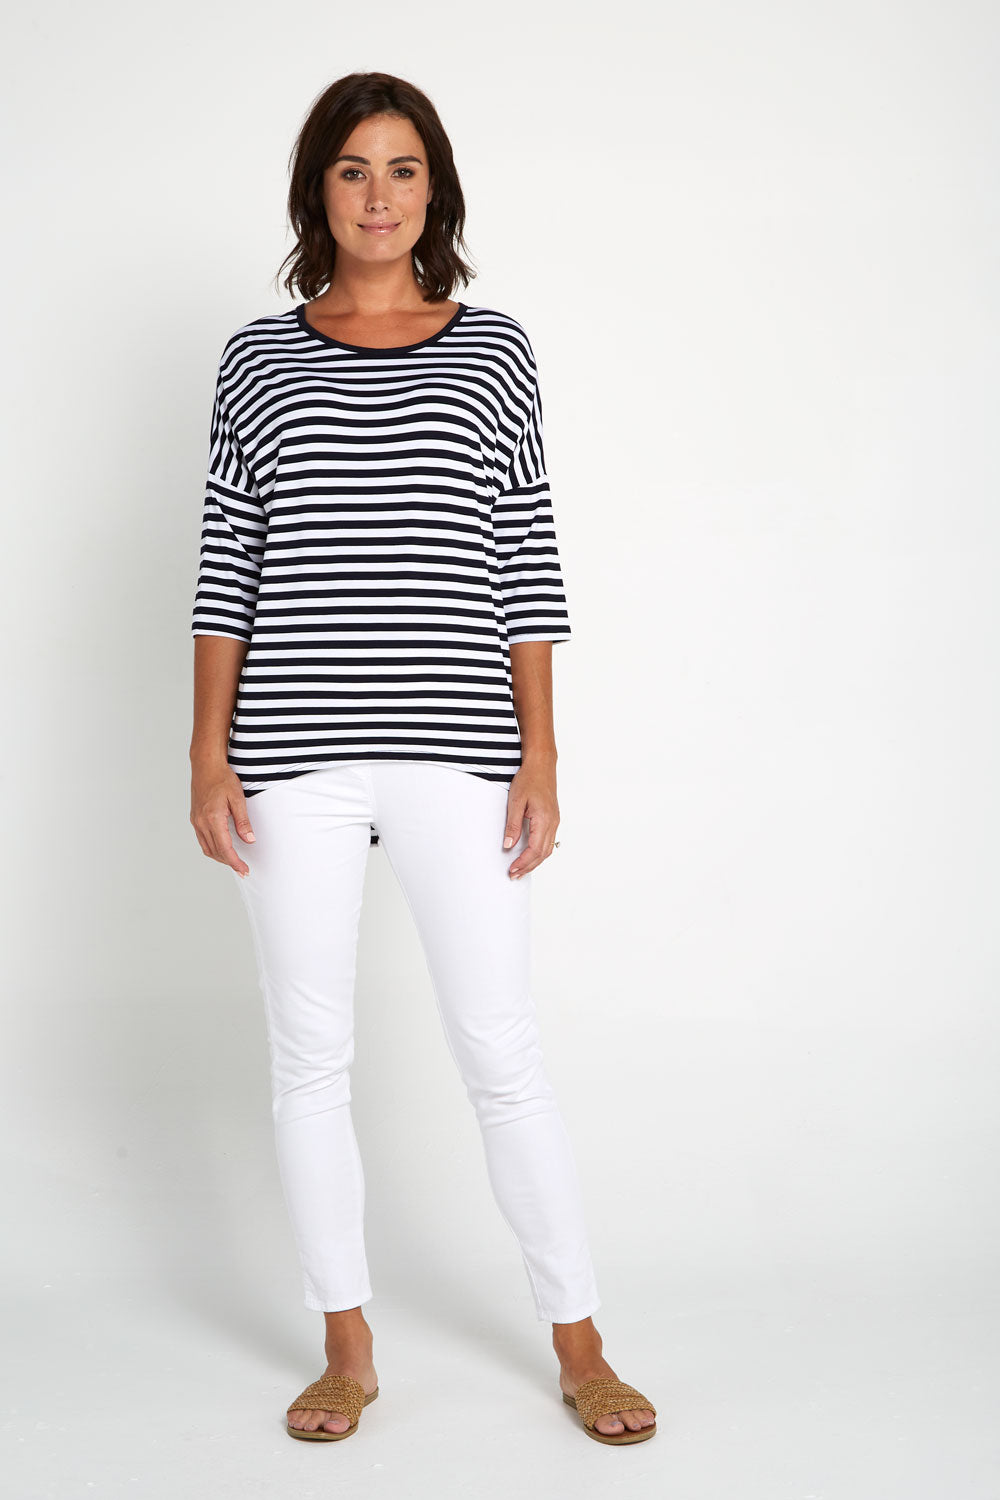 Montmartre Bamboo Top - Navy White Stripe